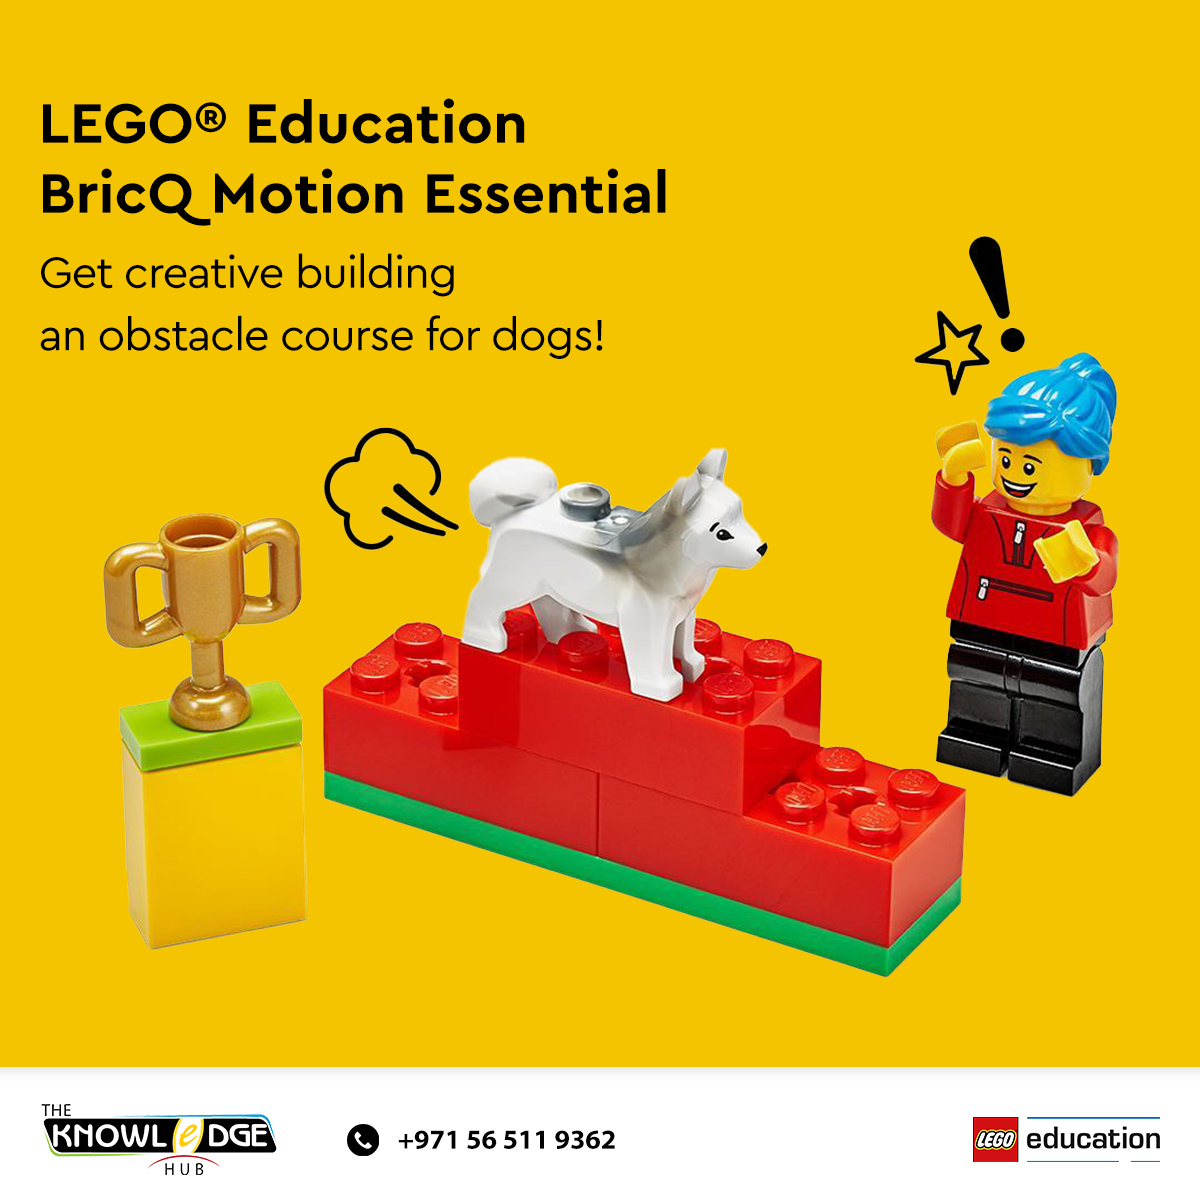 Fetch your BricQ Motion Essential set and get creative building obstacle courses. Introduce your students to the elements in #BricQMotion Essential with the Dog Obstacle Course lesson. Shop the product from here: bit.ly/3Leox0o